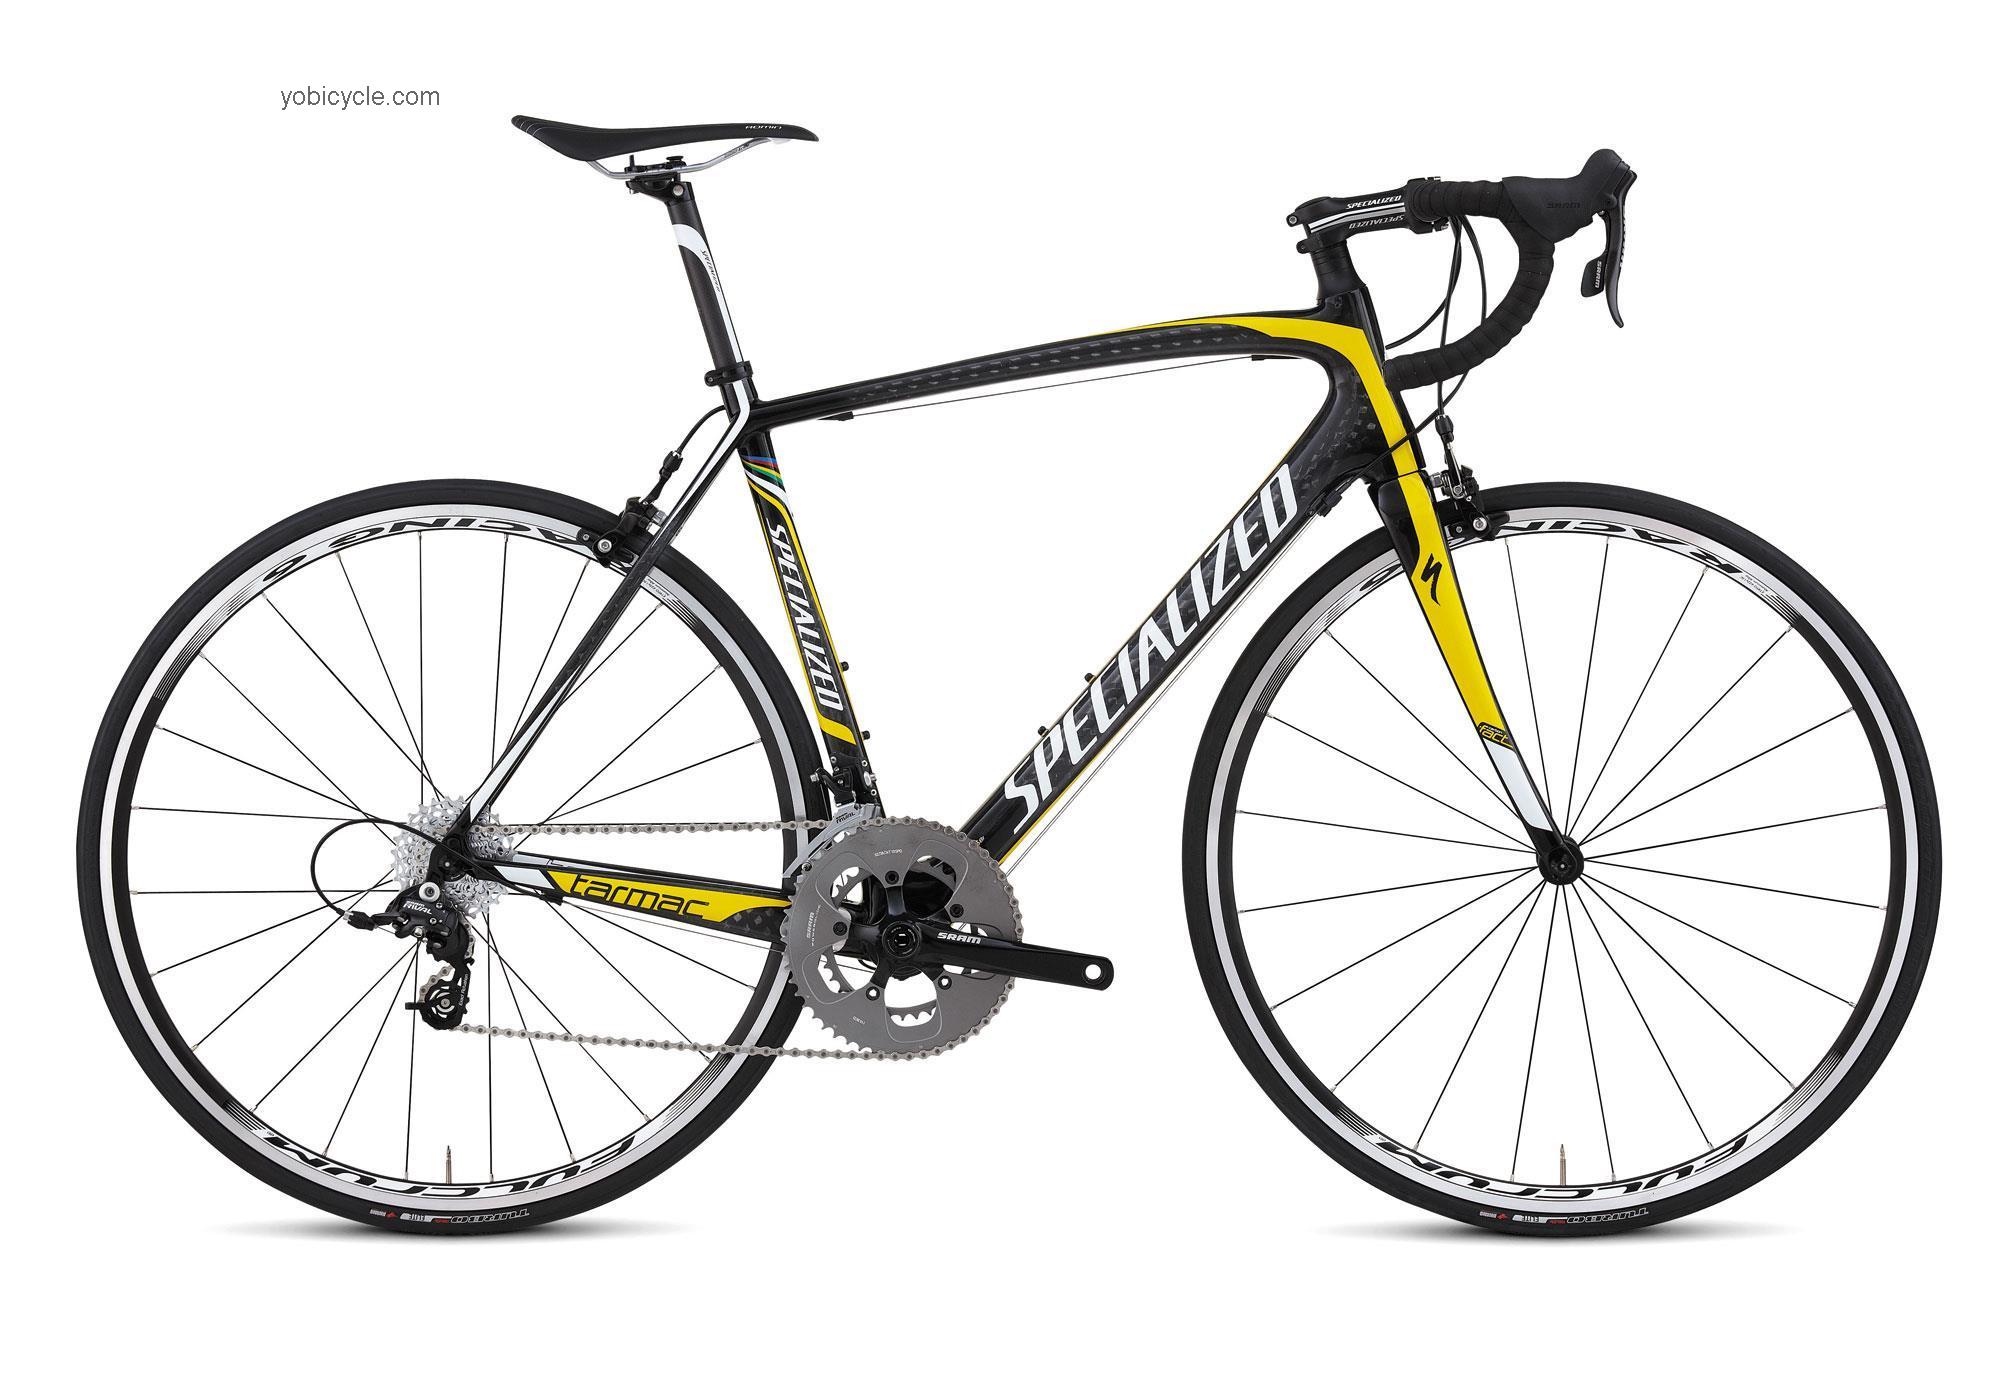 Specialized Tarmac EliteRival M2 competitors and comparison tool online specs and performance